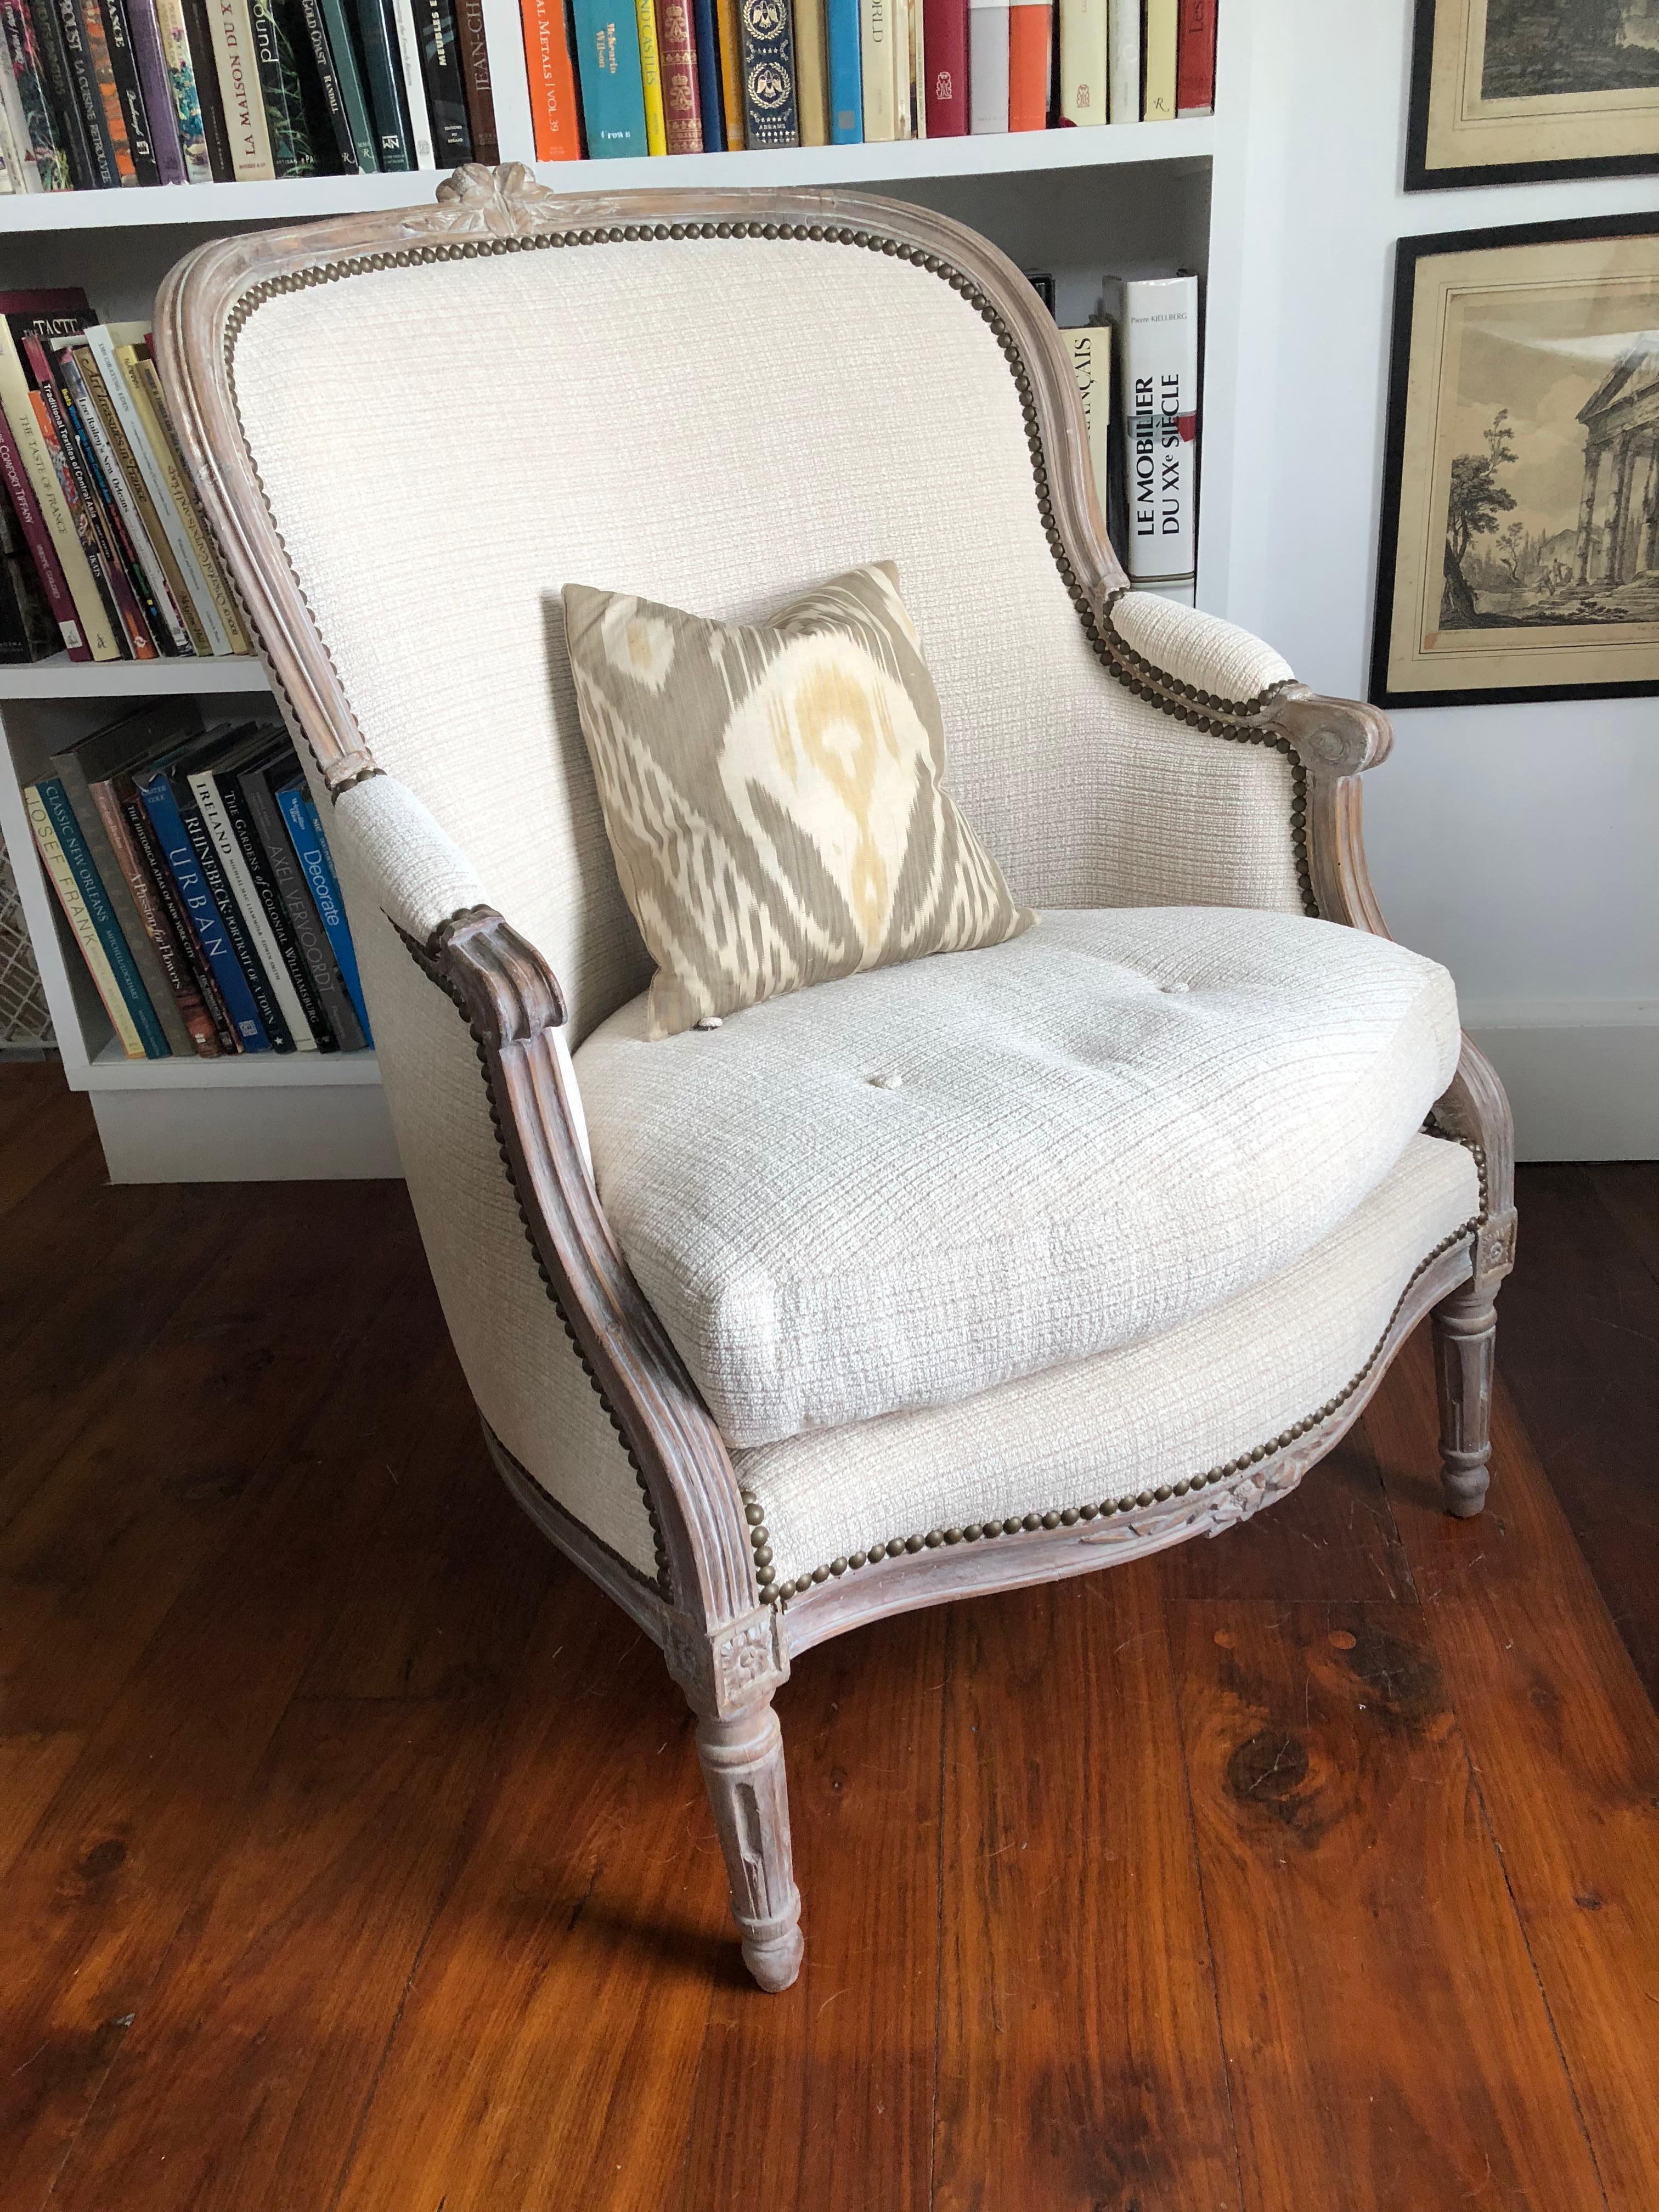 A French Louis XVI period bergère chair with a carved beechwood frame, bleached with a light whitewash, circa 1790. Recently re-upholstered in a cream cotton woven fabric with nailhead trim. Includes small back pillow in silk Ikat. Very sturdy and